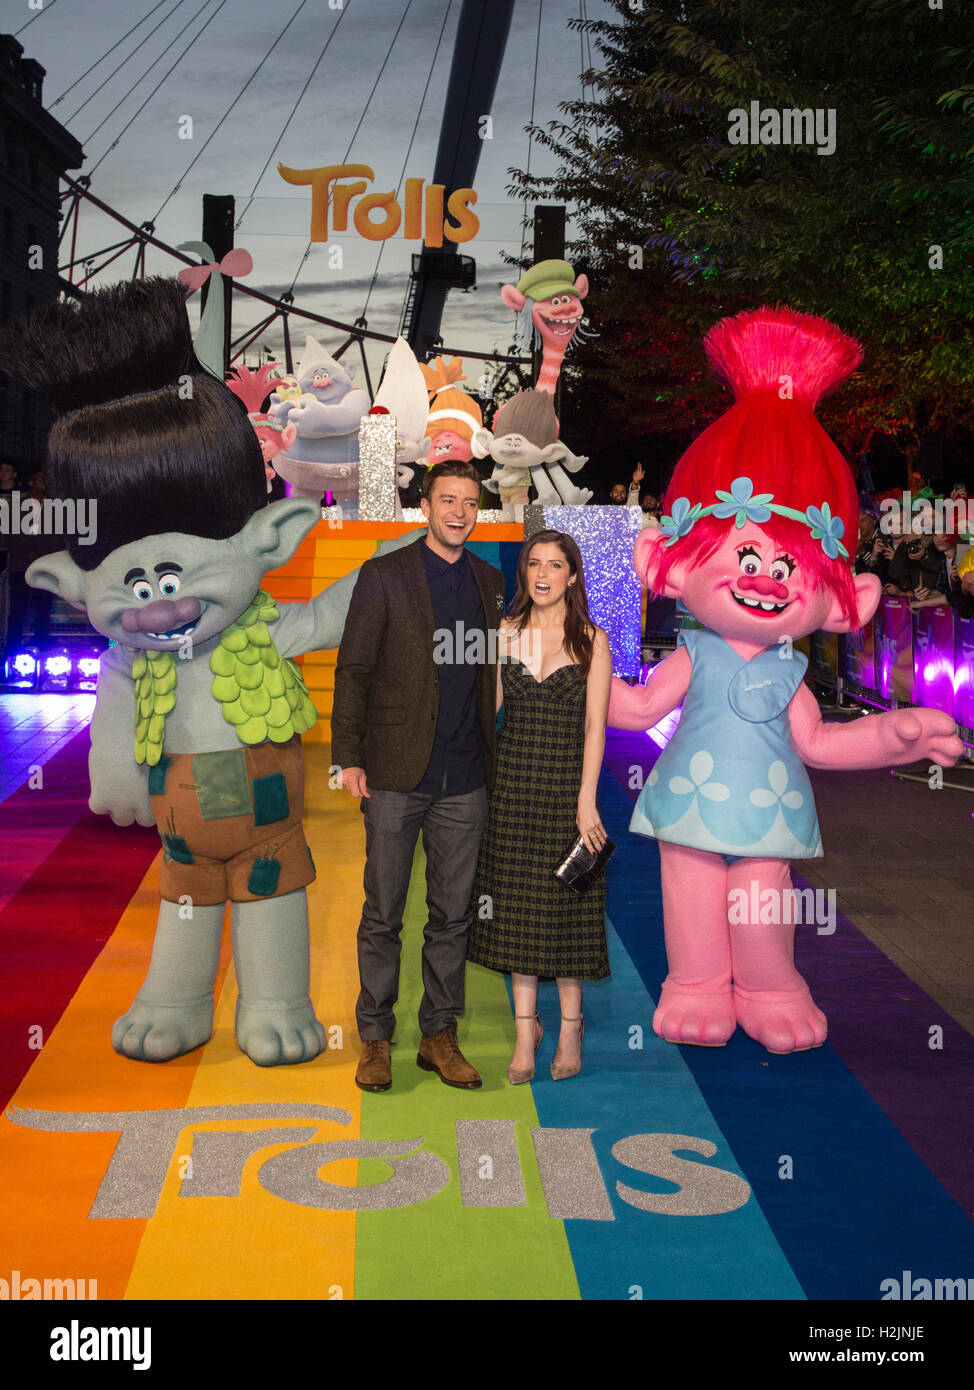 London, UK. 29 September 2016. Justin Timberlake and Anna Kendrick with  troll characters from the movie. Anna Kendrick and Justin Timberlake launch  the movie TROLLS and light up The London Eye at